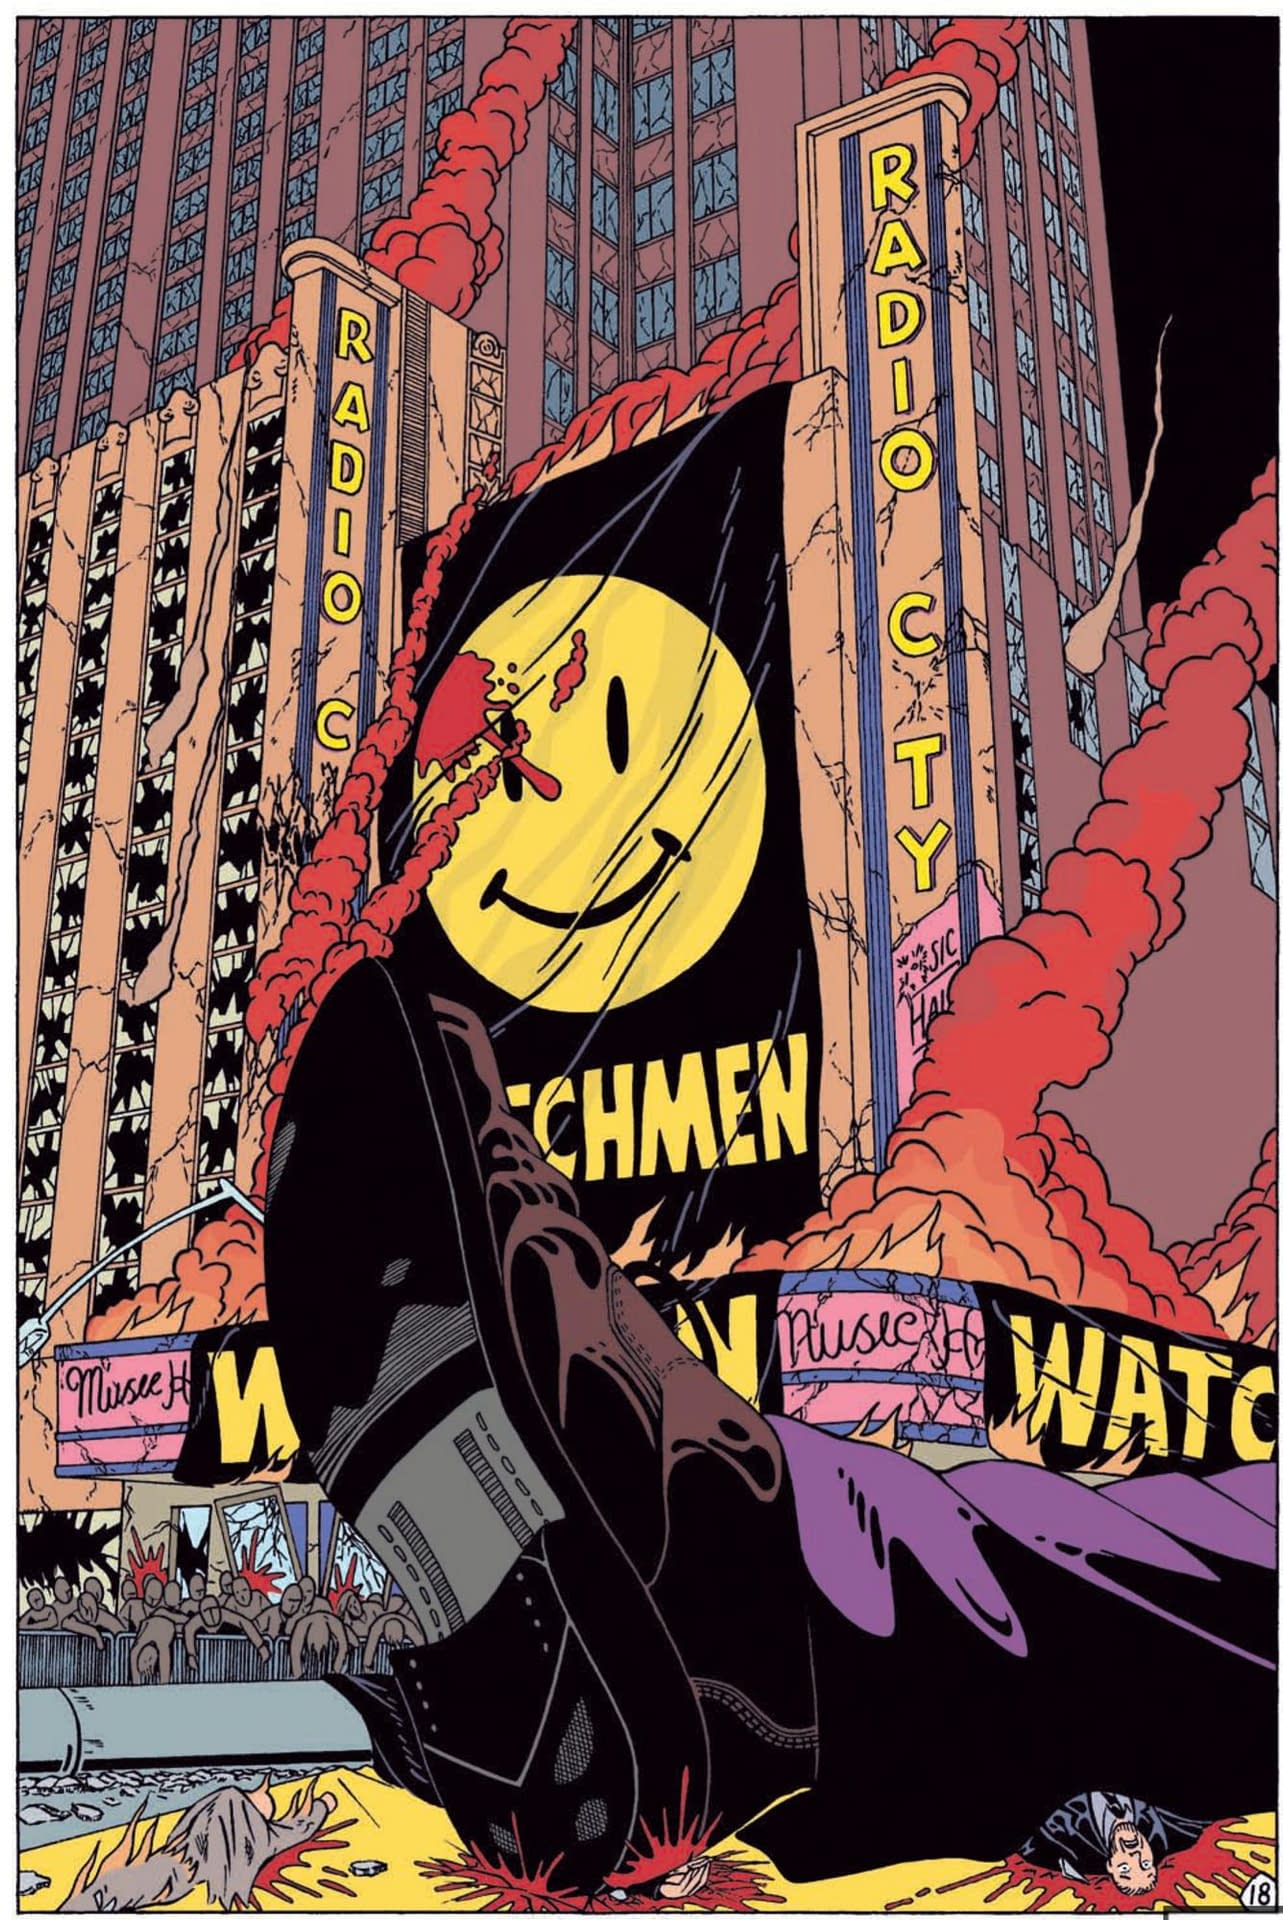 Heavy Metal's Soft Wood #1 Best-Selling Magazine in Comic Shops &#8211; Was it All Watchmensch's Fault?